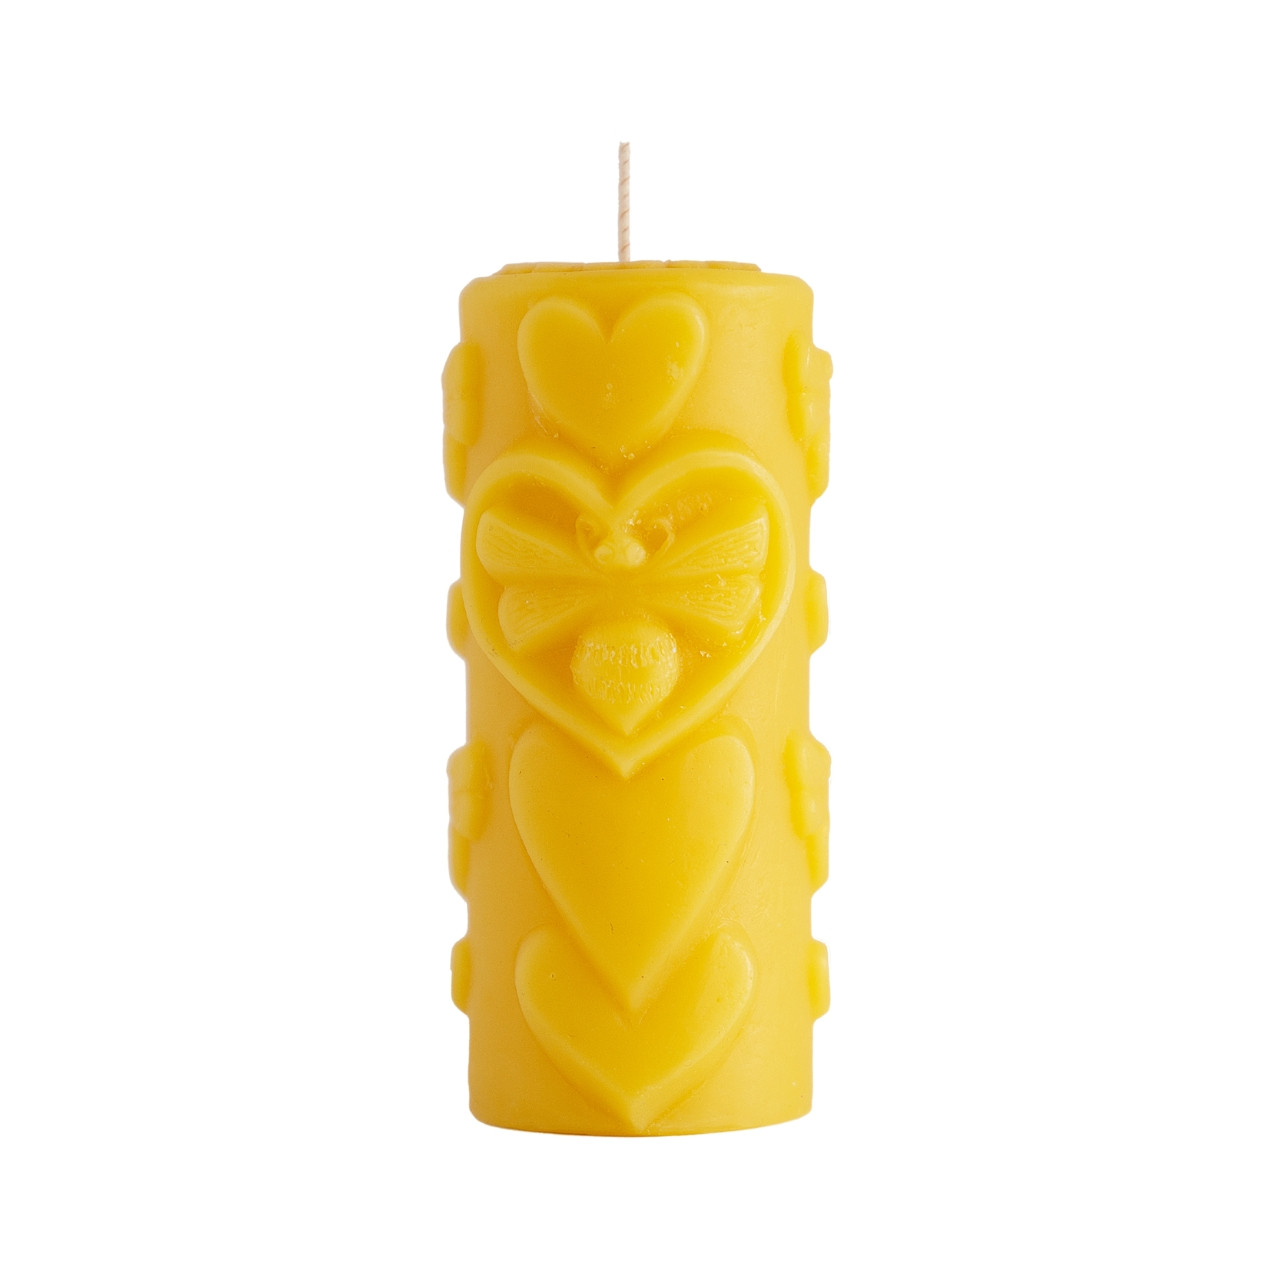 Pure Beeswax Apothecary Glass